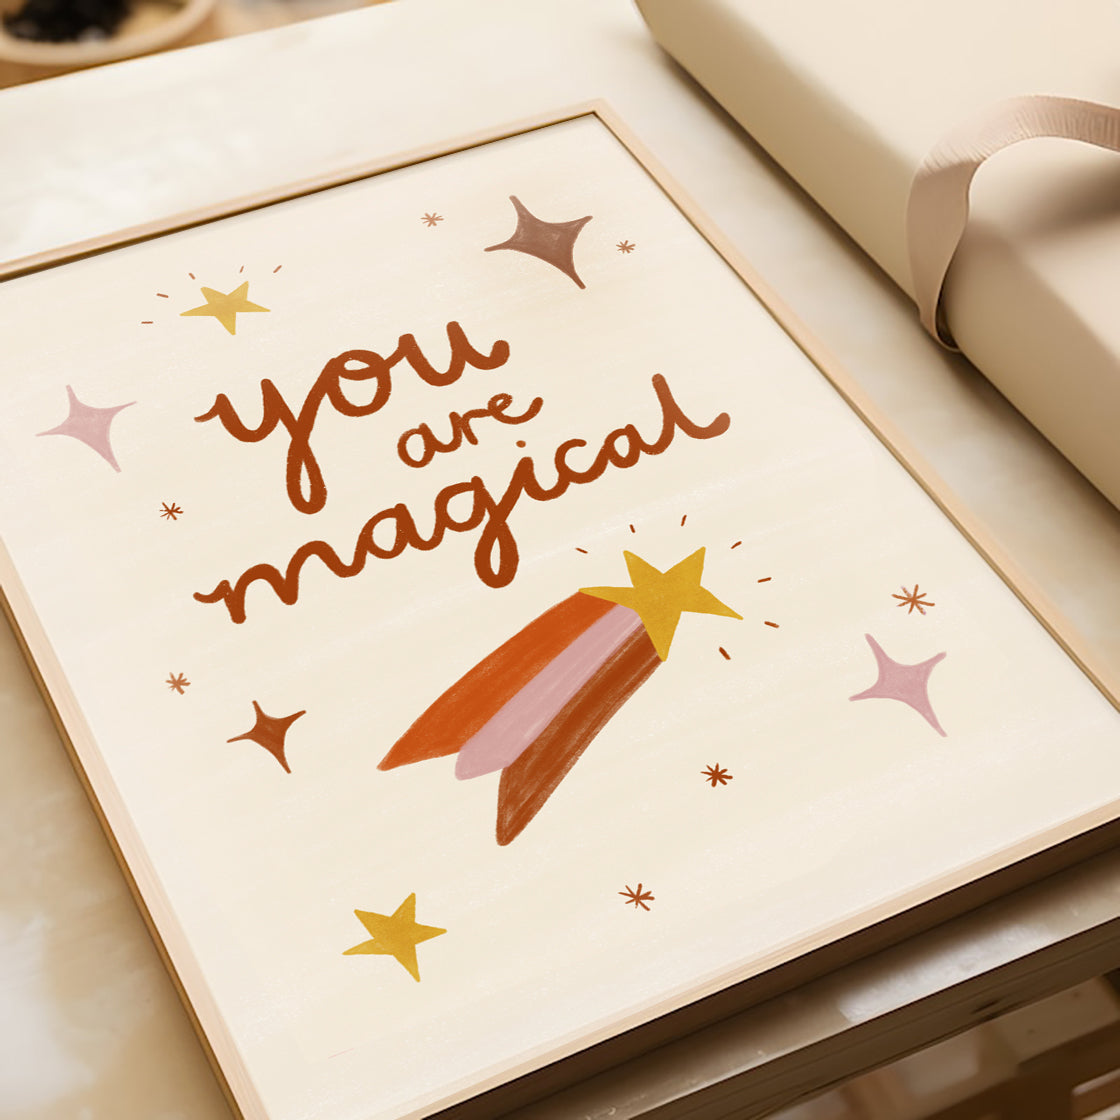 You Are Magical Print